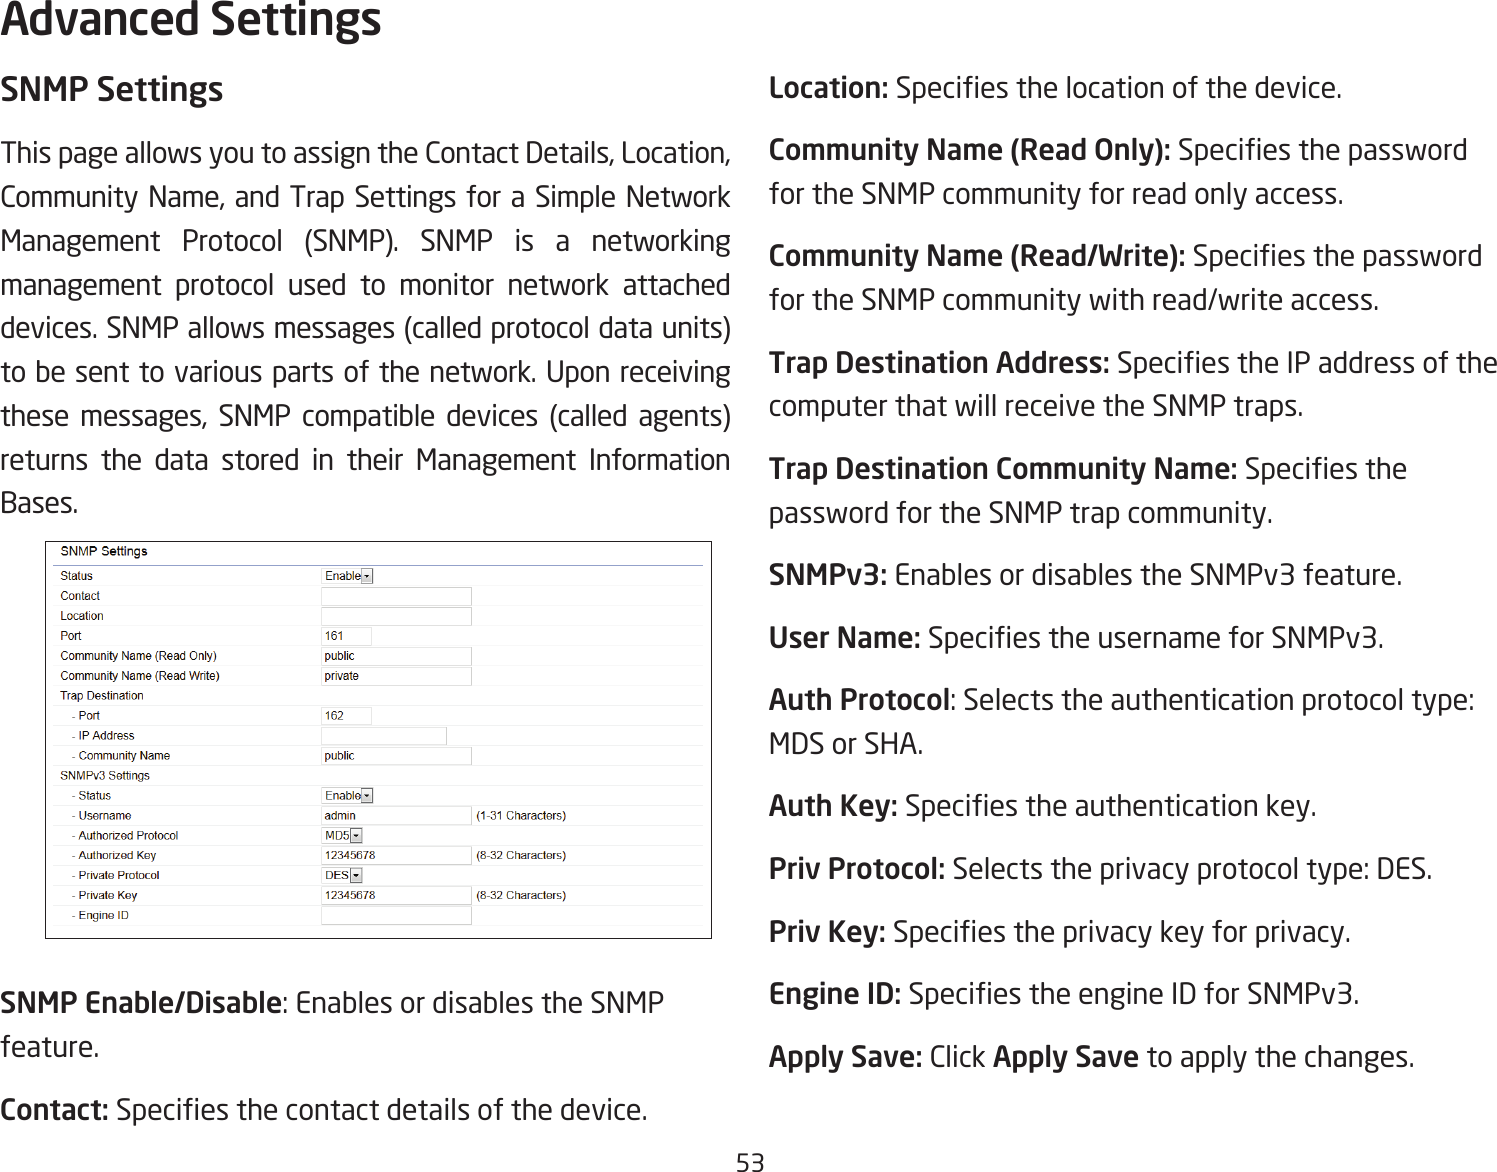 53SNMP SettingsThis page allows you to assign the Contact Details, Location, Community Name, and Trap Settings for a Simple Network Management Protocol (SNMP). SNMP is a networking management protocol used to monitor network attached devices. SNMP allows messages (called protocol data units) tobesenttovariousparts ofthenetwork.Uponreceivingthese messages, SNMP compatible devices (called agents) returns the data stored in their Management Information Bases.SNMP Enable/Disable: Enables or disables the SNMP feature.Contact: Speciesthecontactdetailsofthedevice.Location: Speciesthelocationofthedevice.Community Name (Read Only): Speciesthepasswordfor the SNMP community for read only access.Community Name (Read/Write):Speciesthepasswordfor the SNMP community with read/write access.Trap Destination Address:SpeciestheIPaddressofthecomputer that will receive the SNMP traps.Trap Destination Community Name: Speciesthepassword for the SNMP trap community.SNMPv3: Enables or disables the SNMPv3 feature.User Name:SpeciestheusernameforSNMPv3.Auth Protocol: Selects the authentication protocol type: MDS or SHA.Auth Key: Speciestheauthenticationkey.Priv Protocol: Selects the privacy protocol type: DES.Priv Key: Speciestheprivacykeyforprivacy.Engine ID: SpeciestheengineIDforSNMPv3.Apply Save: Click Apply Save to apply the changes.Advanced Settings